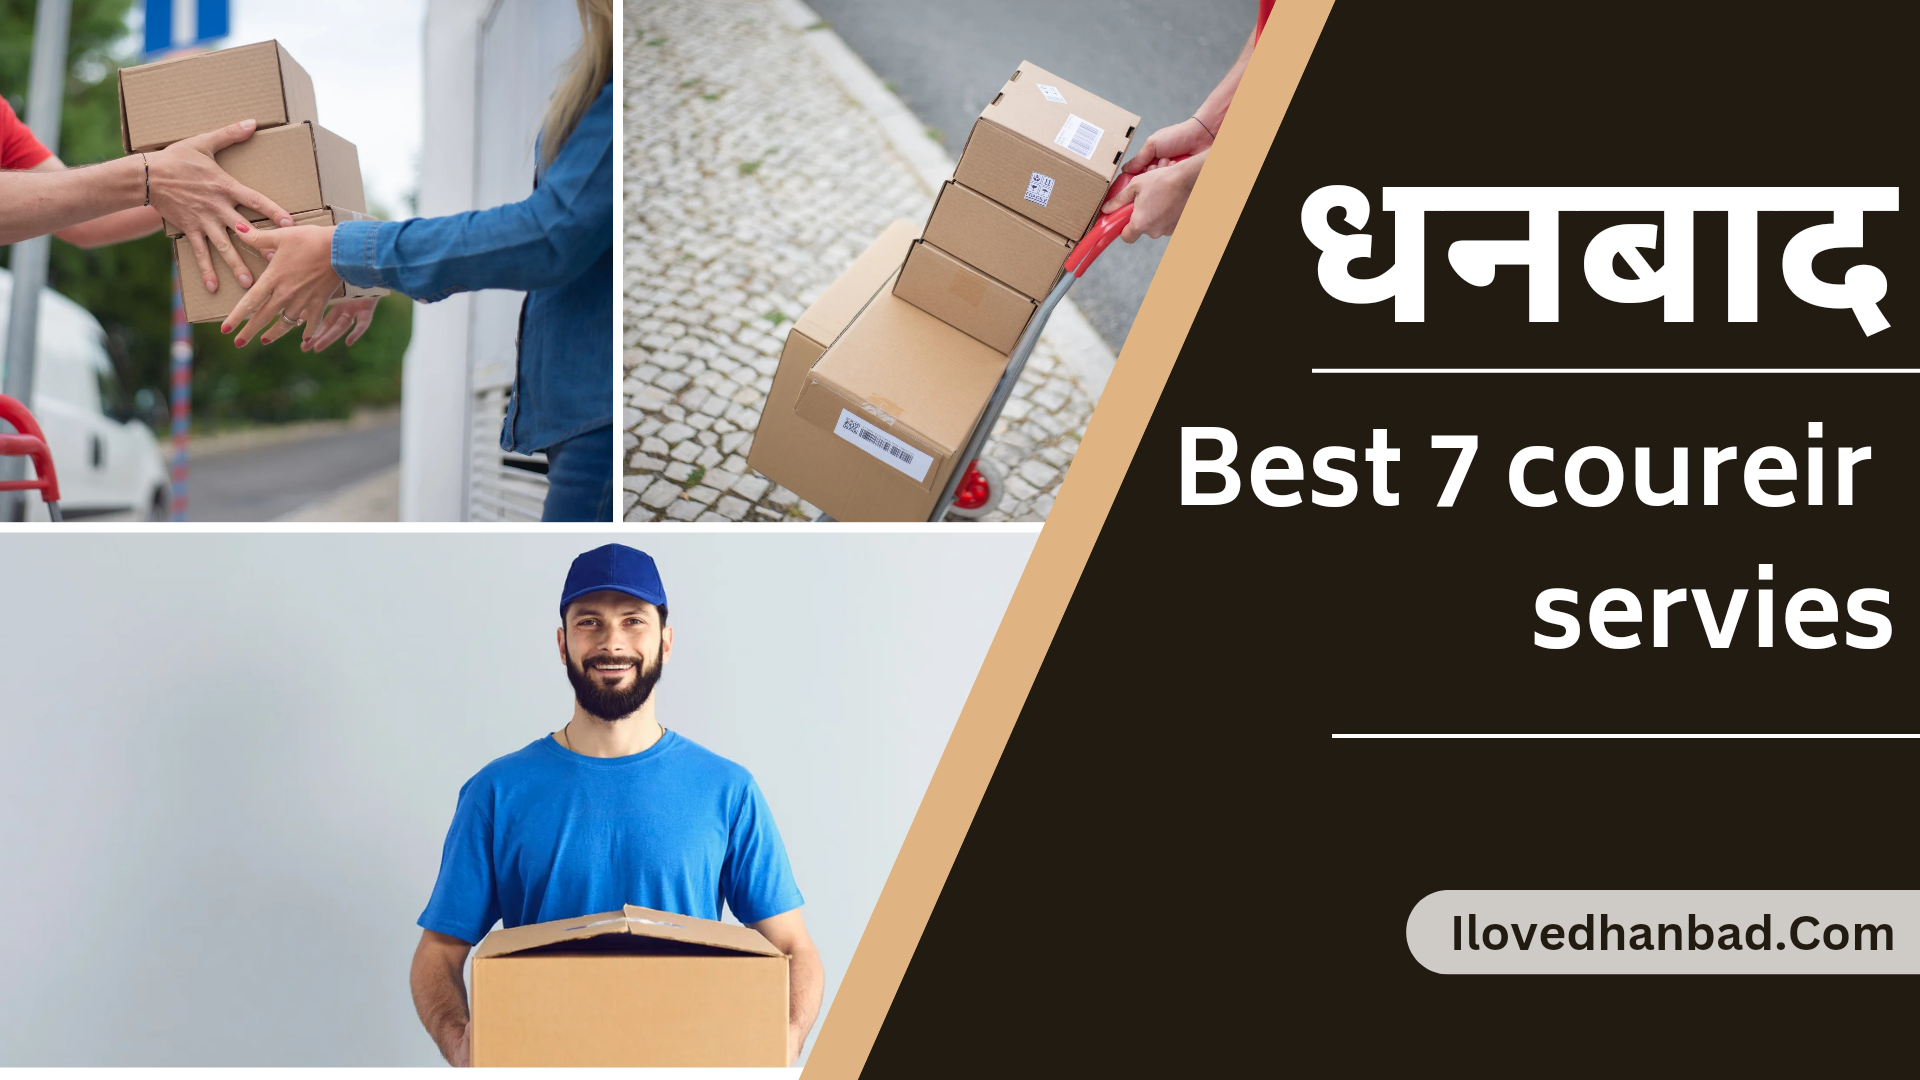 Best 7 Courier Services in Dhanbad